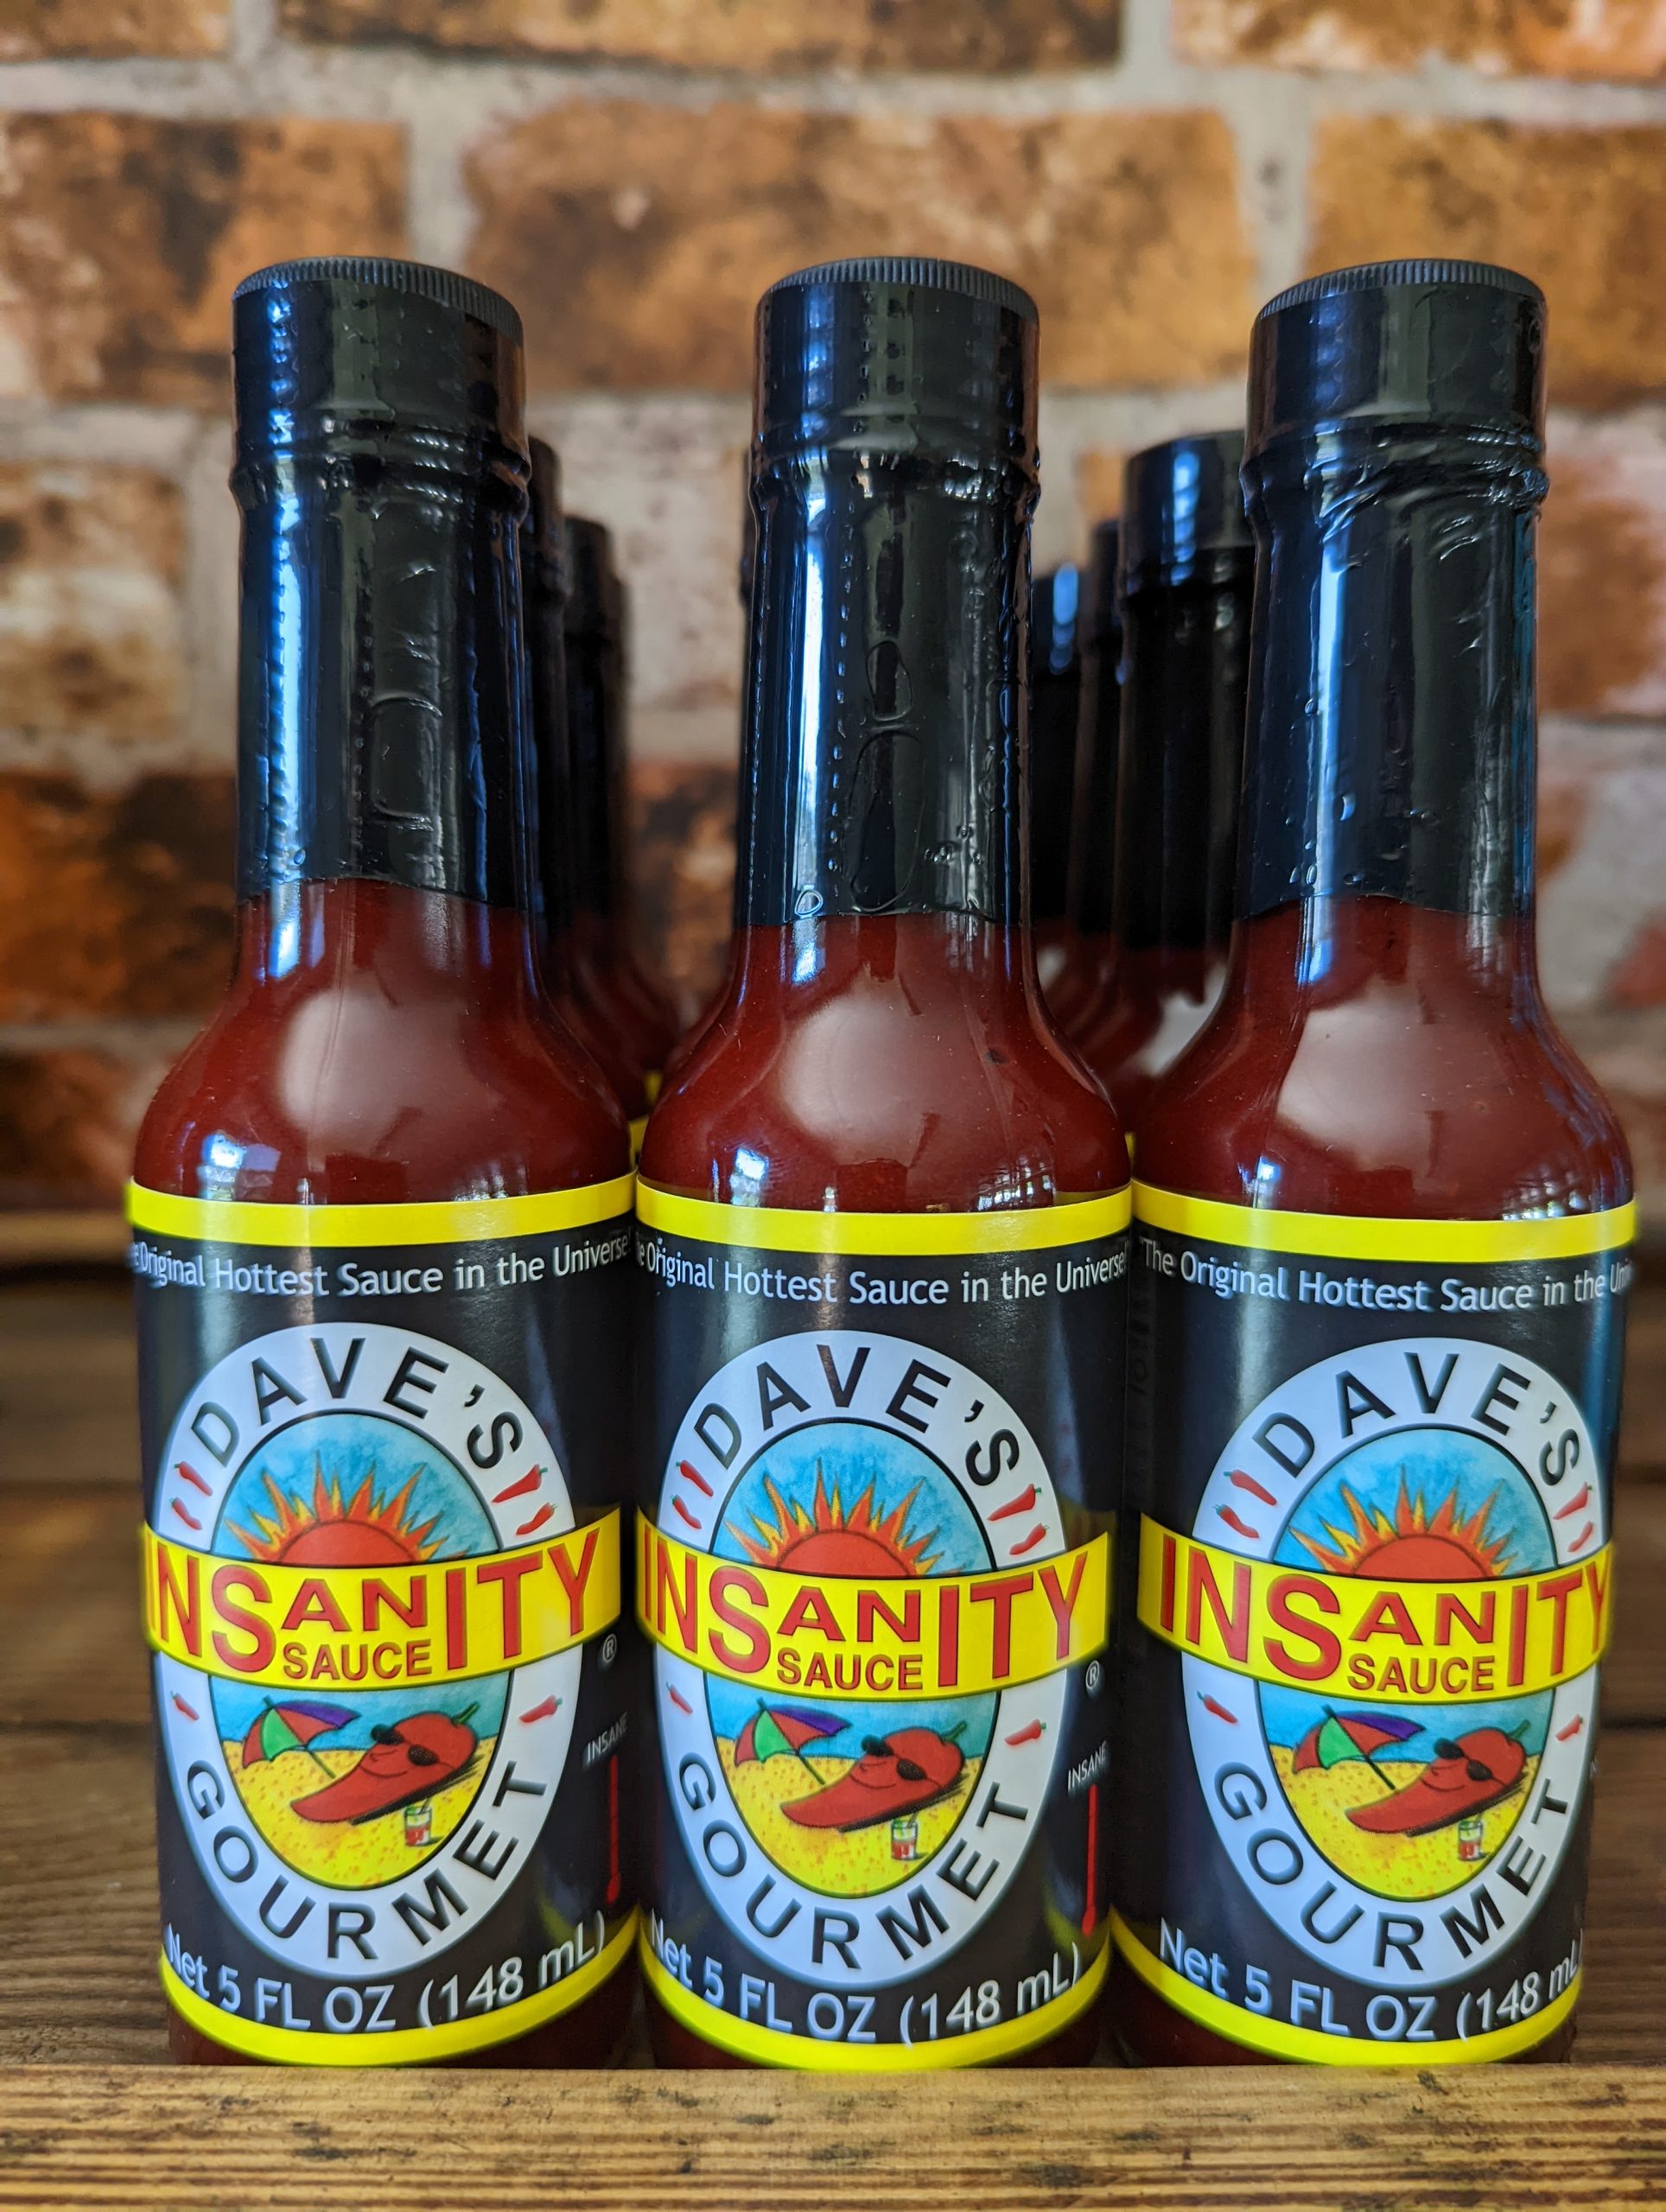 Picture of bottles of the famous Dave's Insanity Sauce on the shelf at the Chilli Ranch.